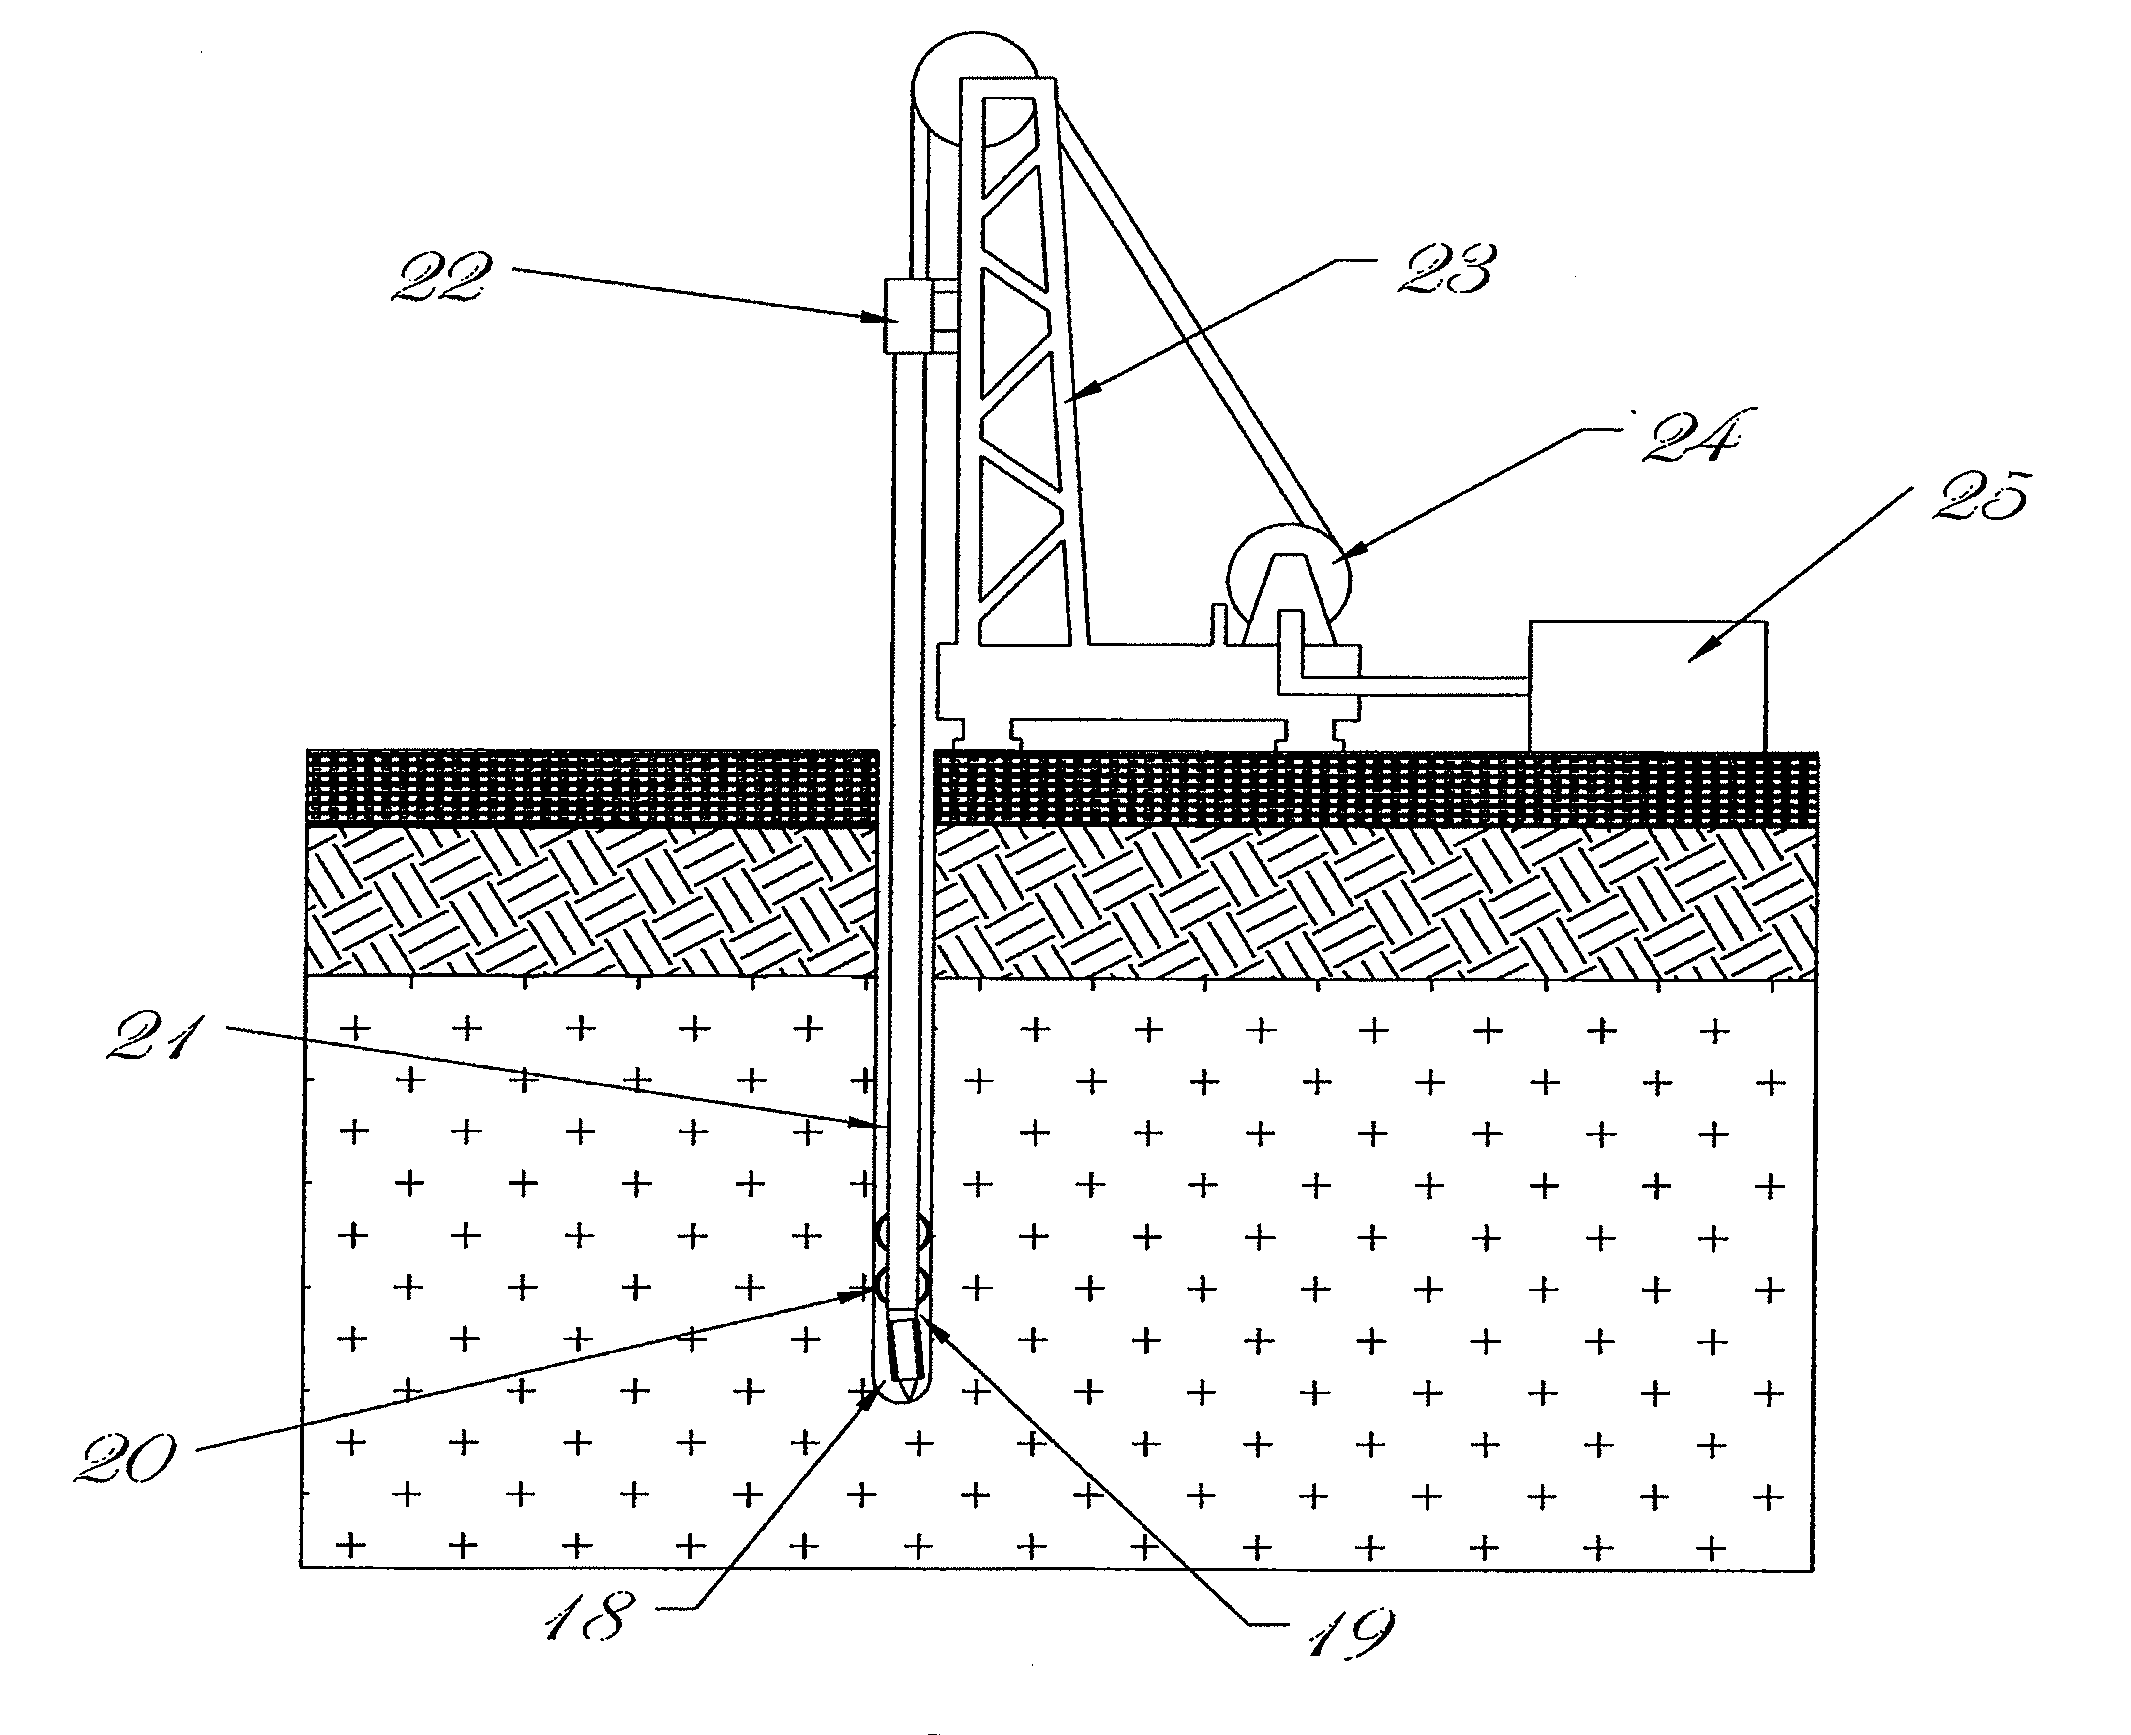 Method and System for Forming a Non-Circular Borehole